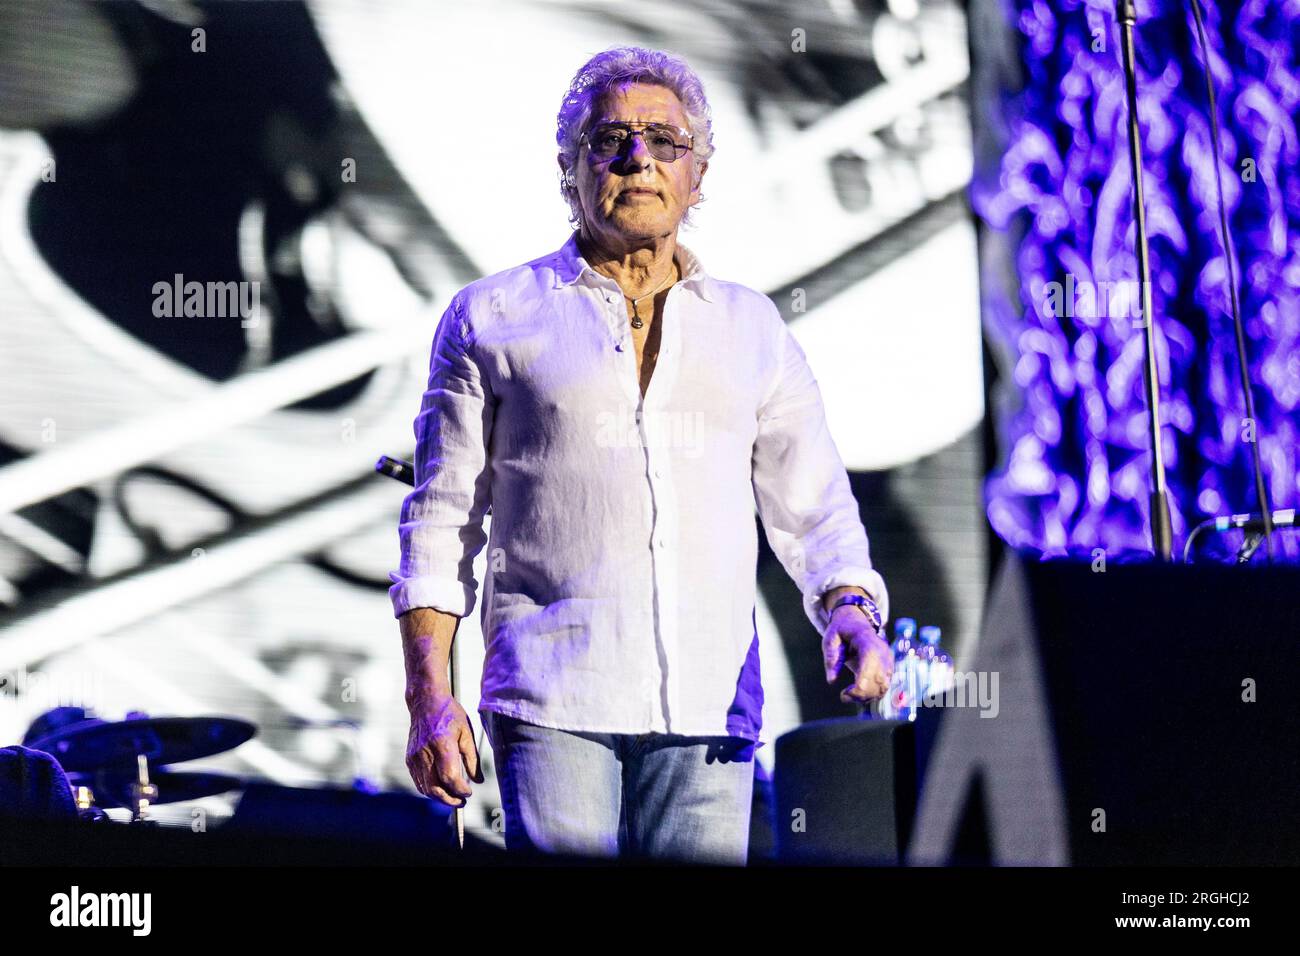 Florence Italy June 17, 2023 The Who live at Firenze Rocks 2023 at Visarno Arena Florence Italy IT © Roberto Finizio / Alamy Stock Photo